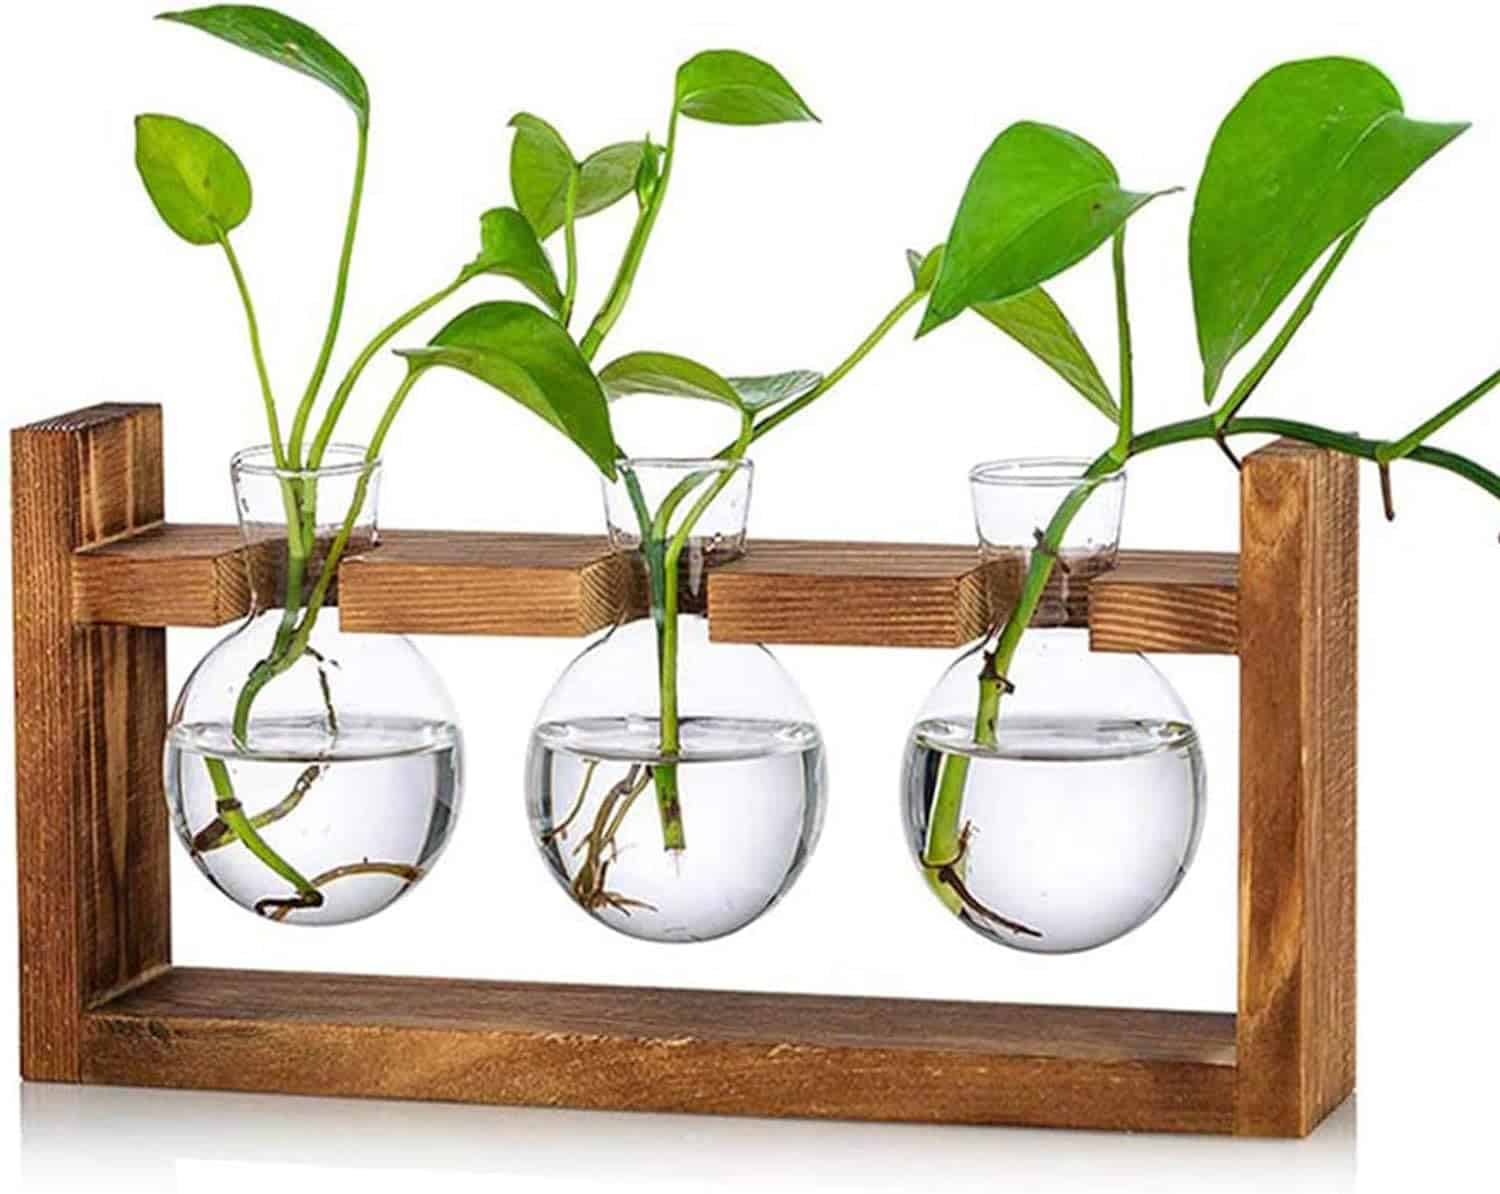 Small Kratky Containers for Clones and Seedlings